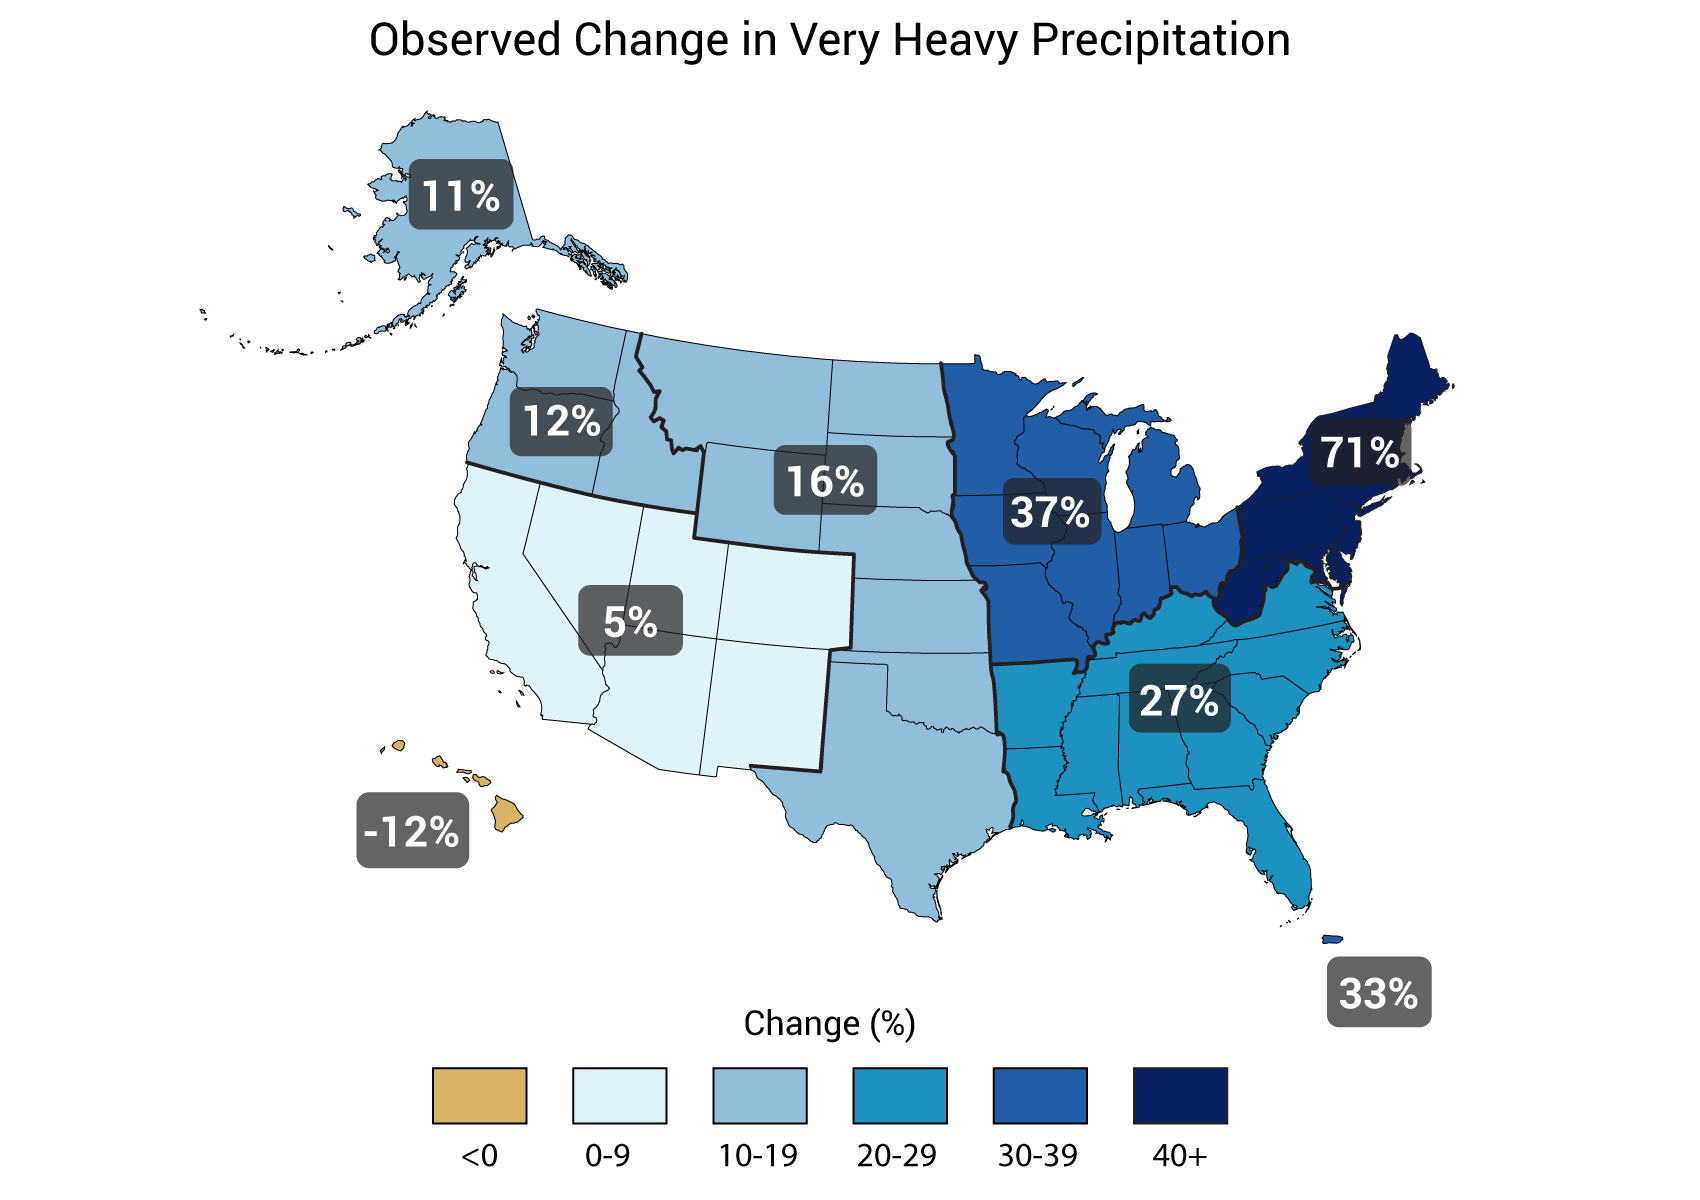 This is Figure 2.18 from the National Assessment: The map shows the percent increases in the amount of precipitation falling in very heavy events (defined as the heaviest 1% of all daily events) from 1958 to 2012 for each region of the continental United States. 